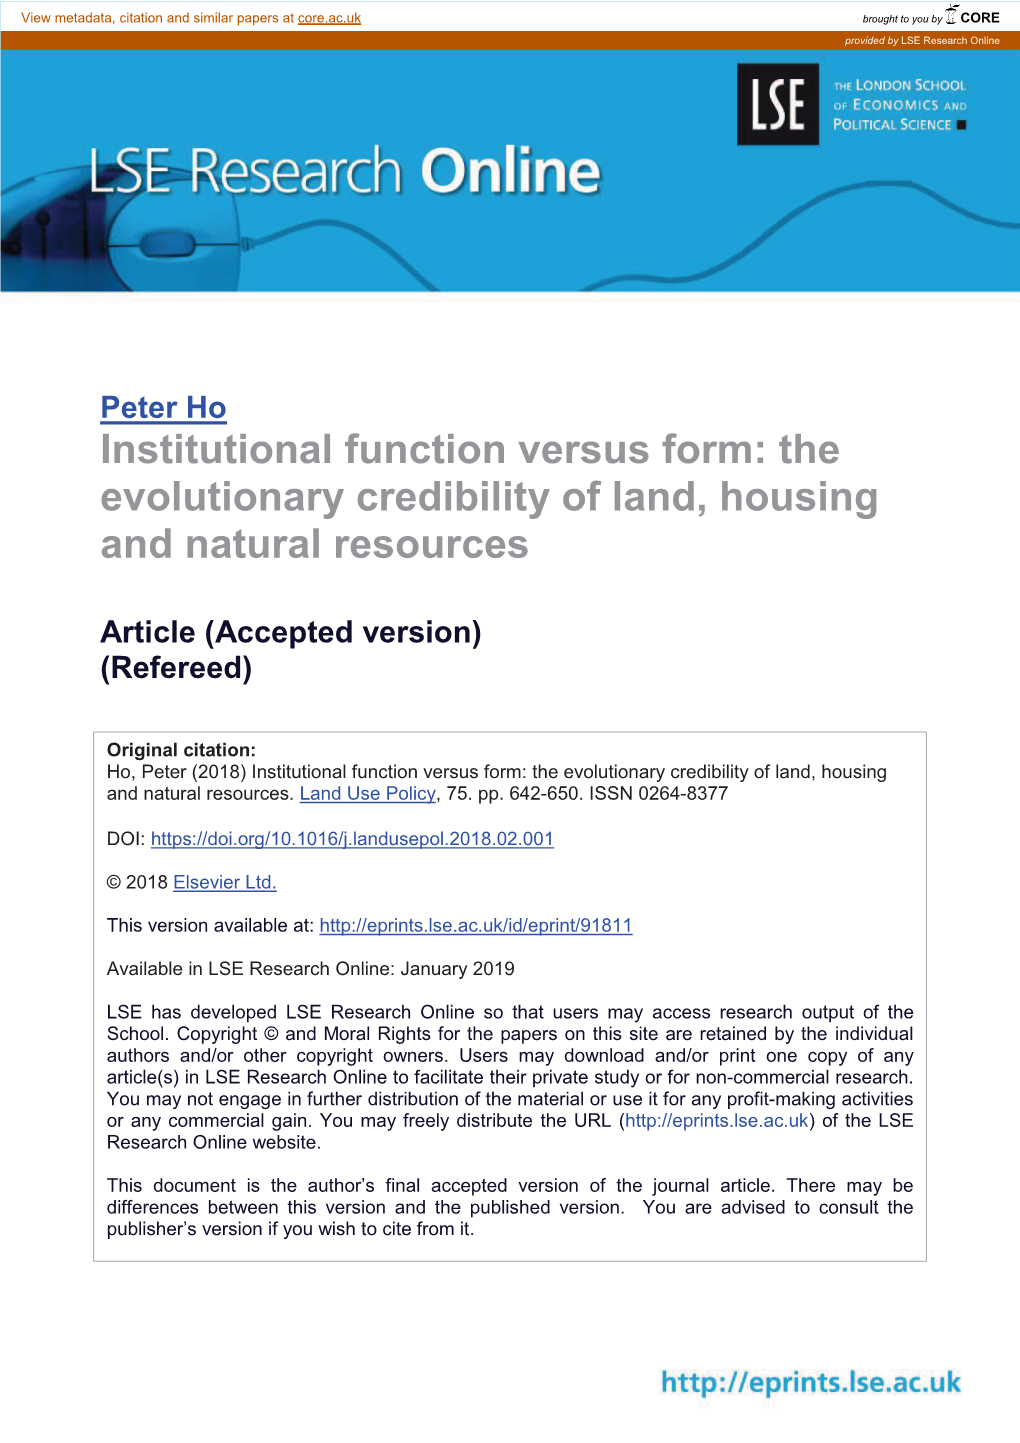 Institutional Function Versus Form: the Evolutionary Credibility of Land, Housing and Natural Resources